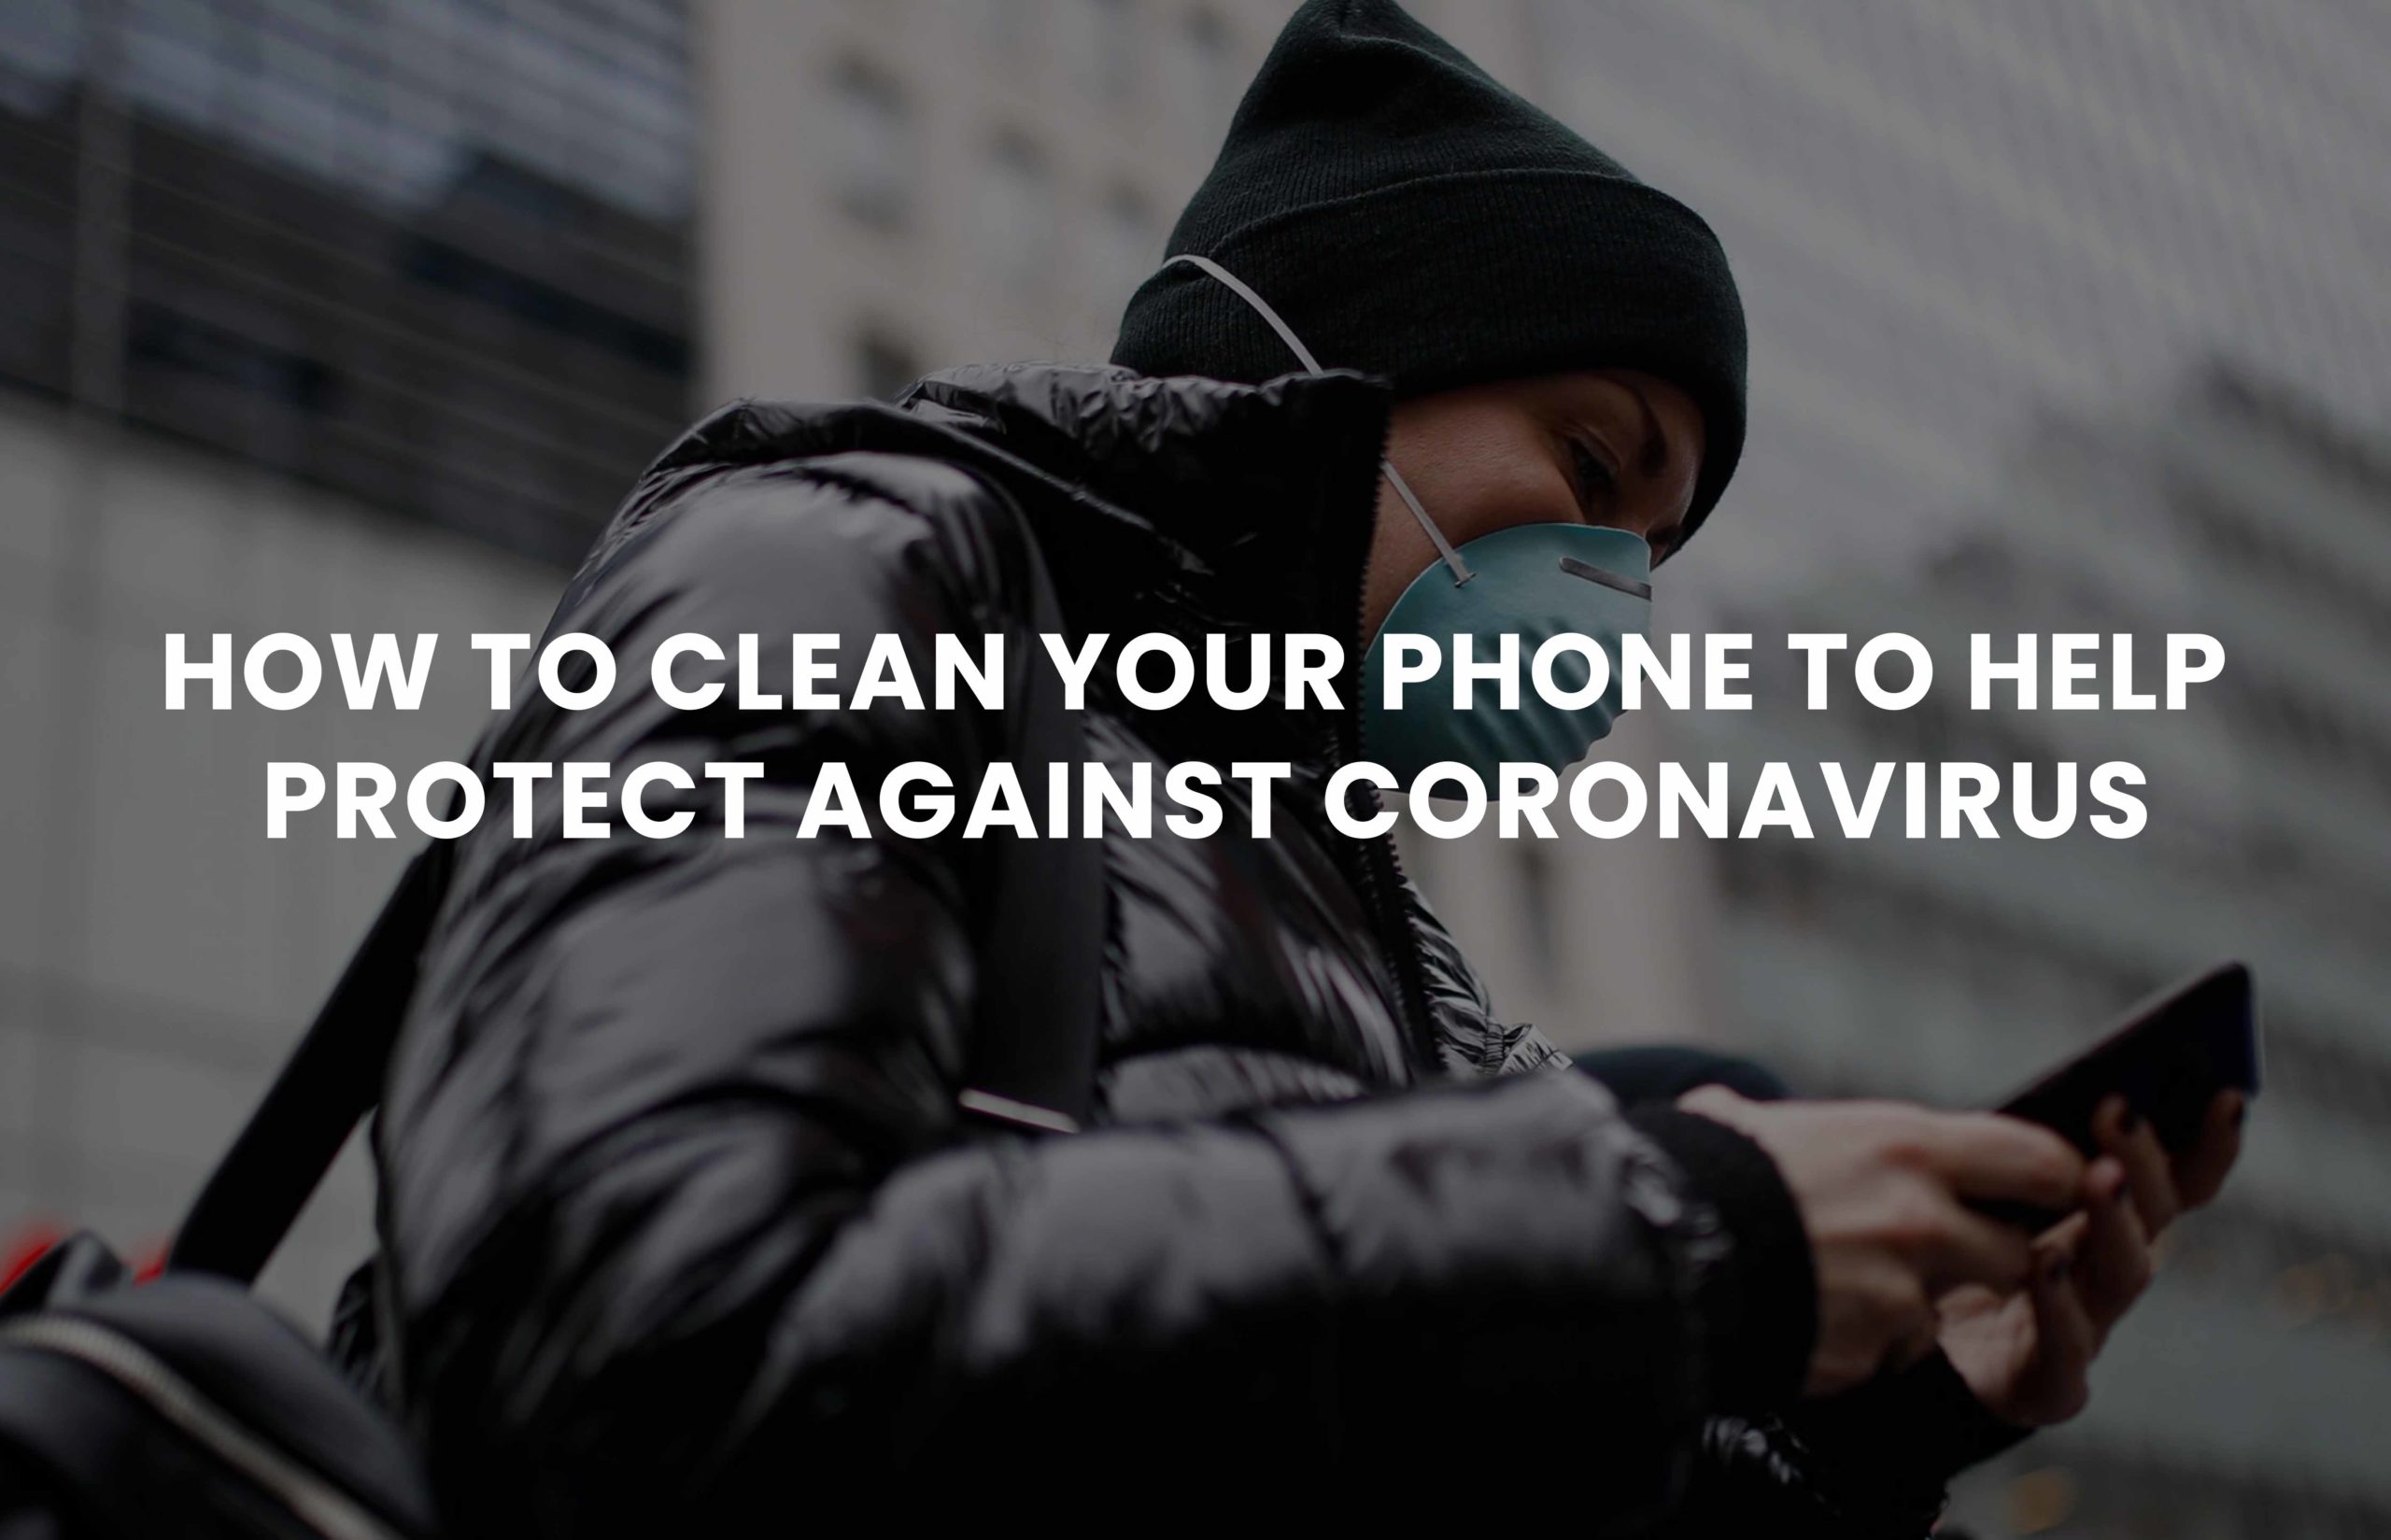 How to Clean Your Phone to Help Protect Against Coronavirus